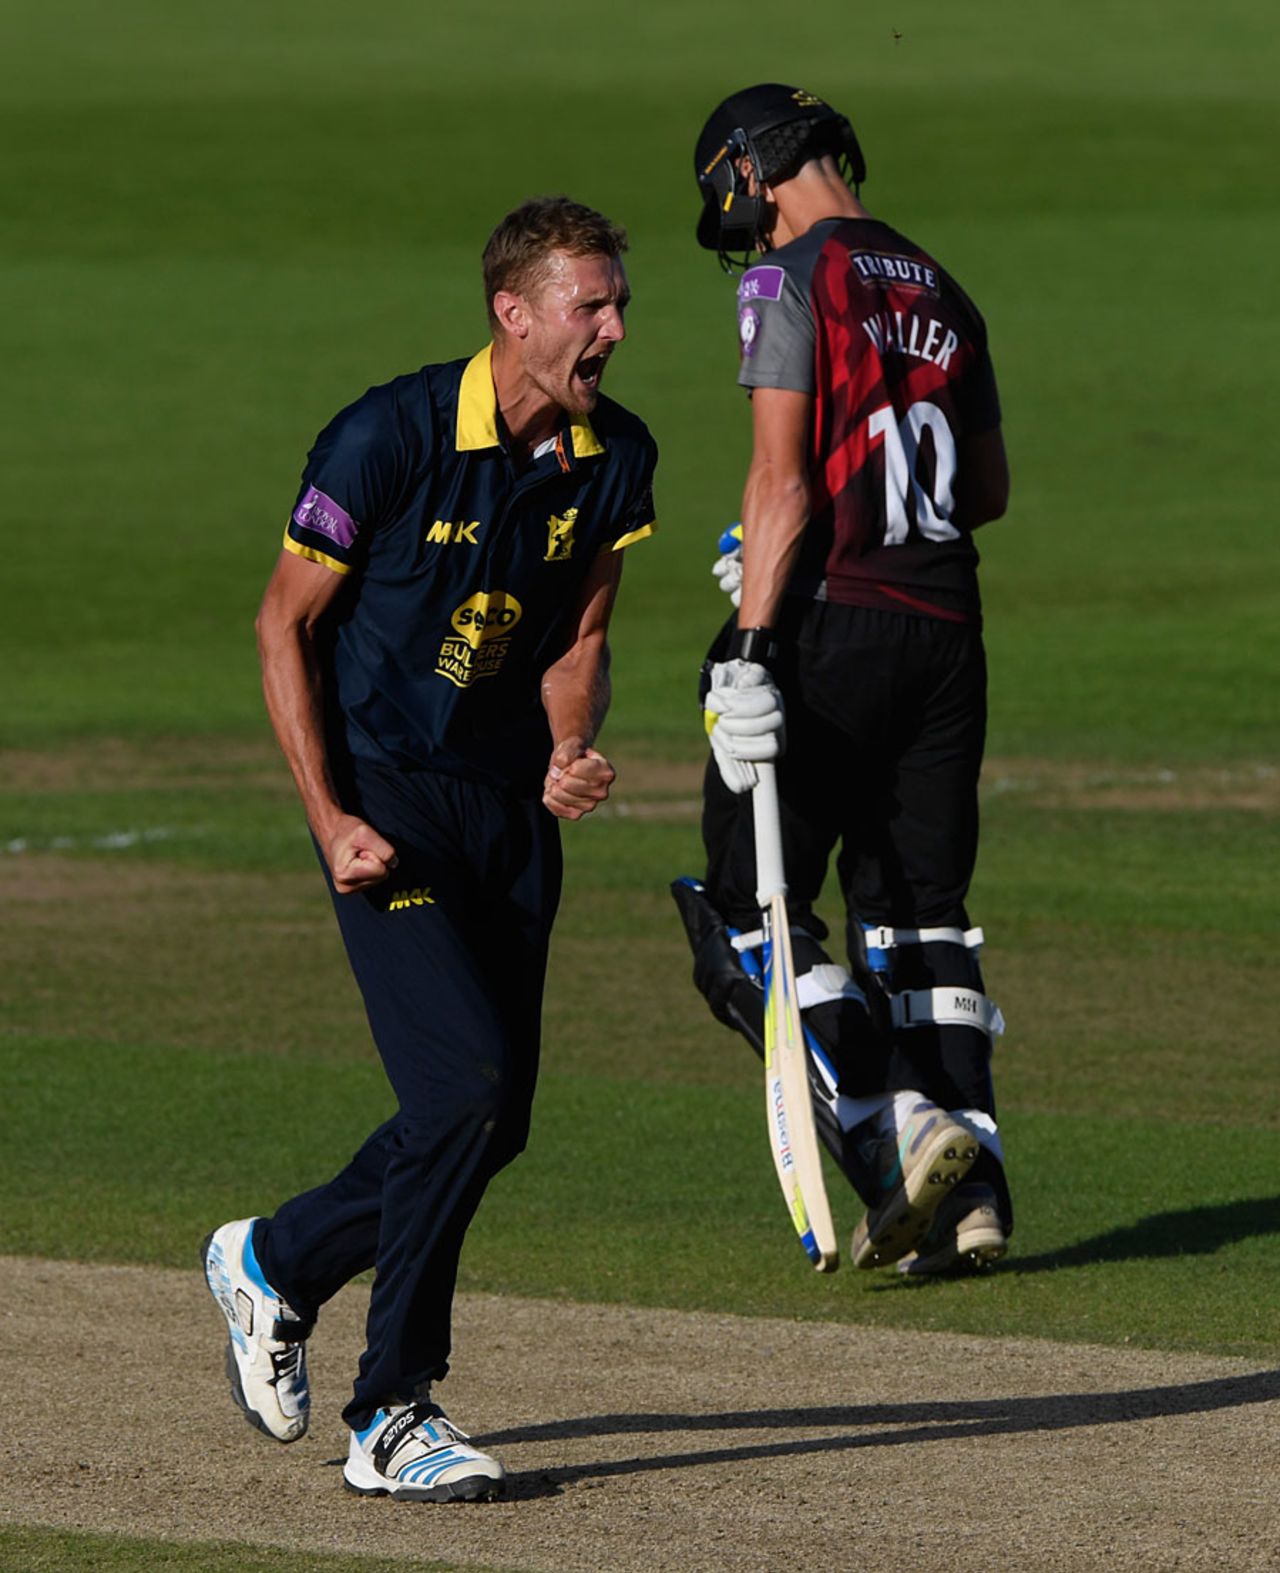 Oliver Hannon-Dalby held his nerve in the final over, Warwickshire v Somerset, Royal London Cup, Semi-final, Edgbaston, August 29, 2016